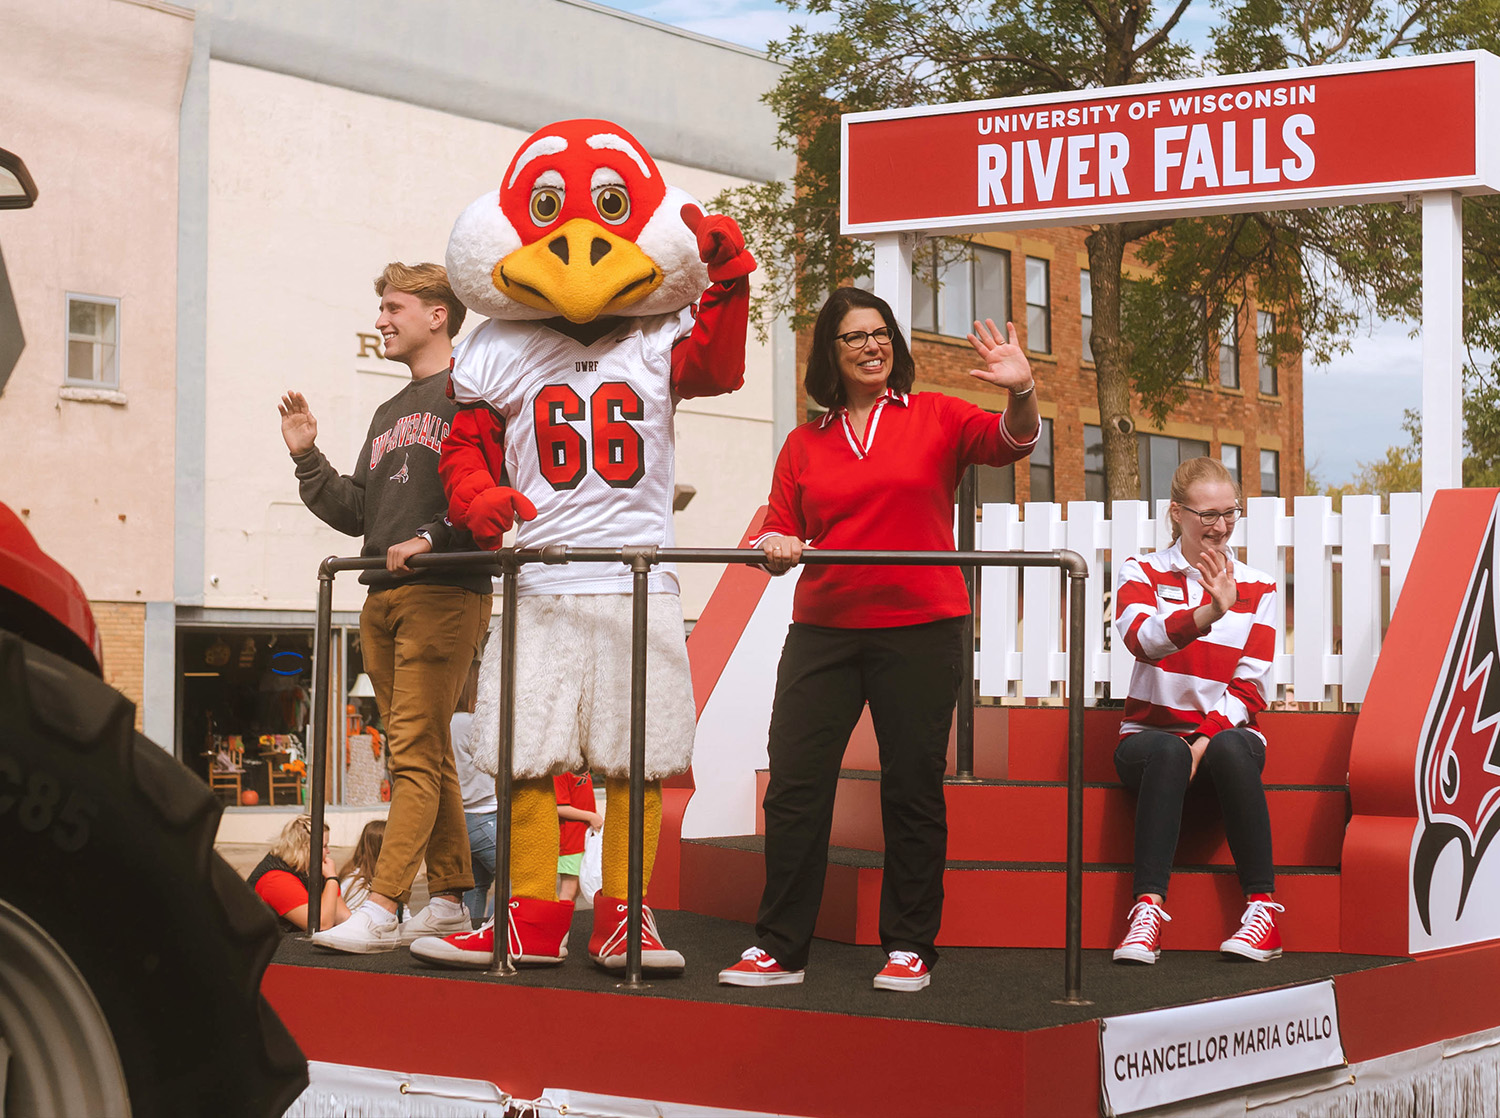 Chancellor Maria Gallo rides on top of the UWRF homecoming parade fload